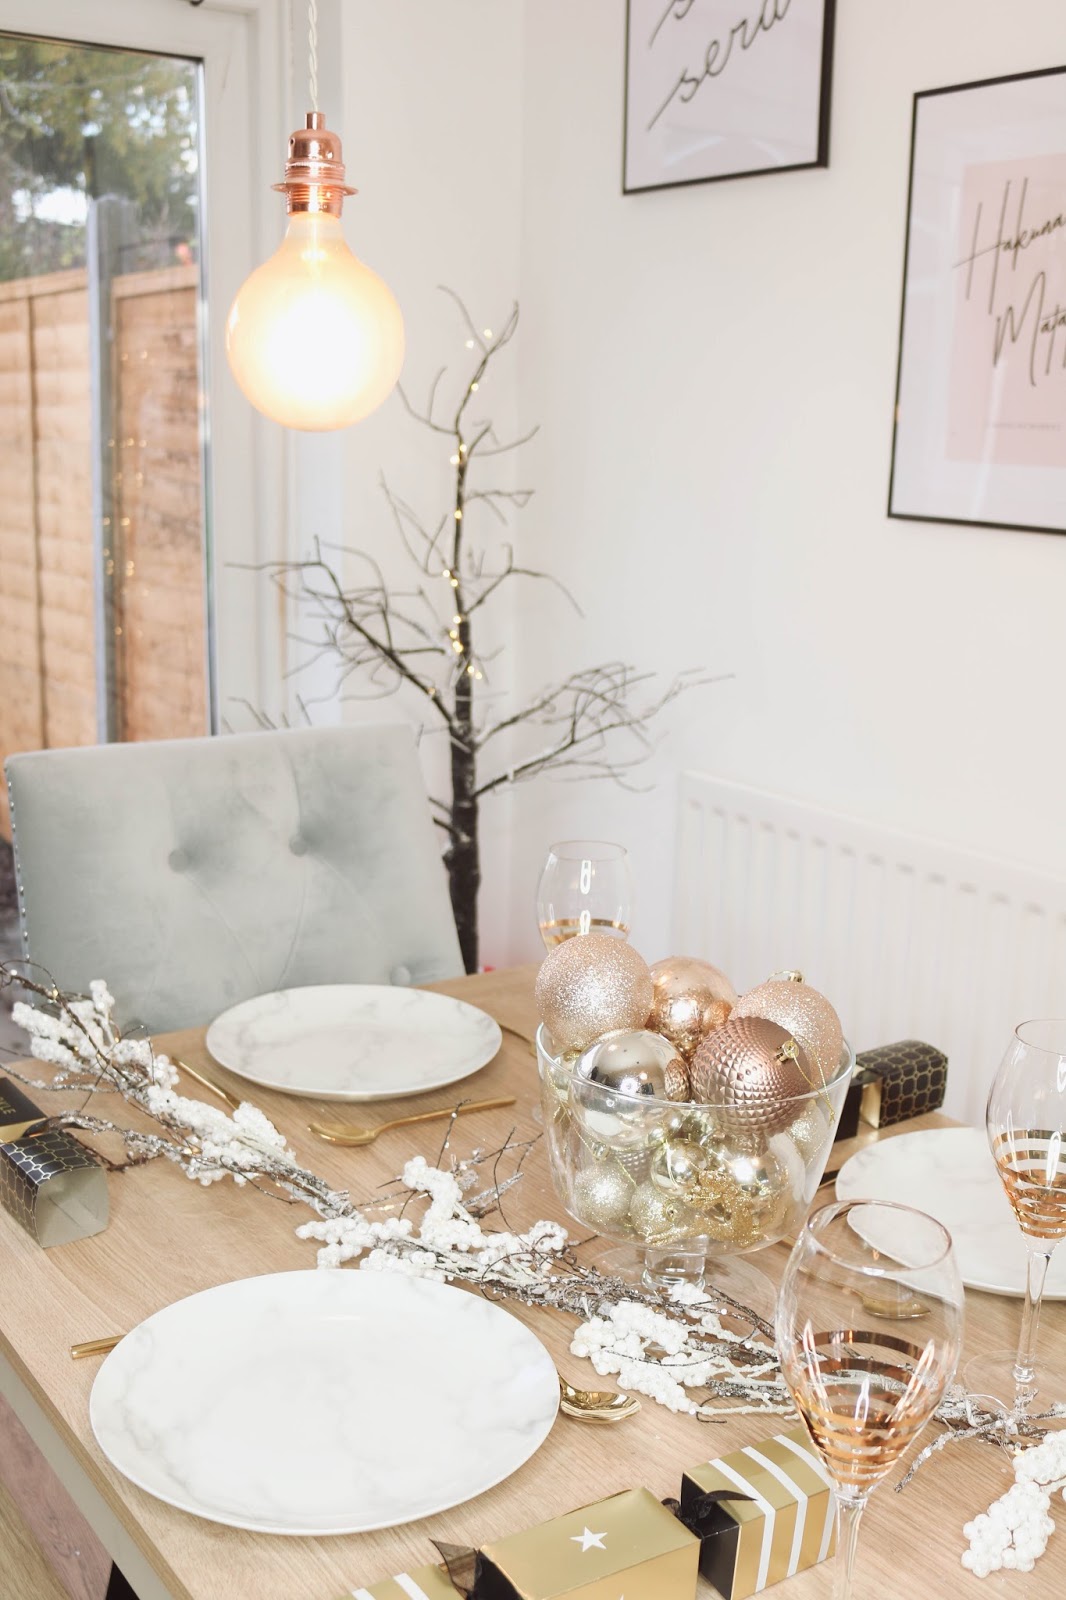 How To Decorate Your Table For Christmas